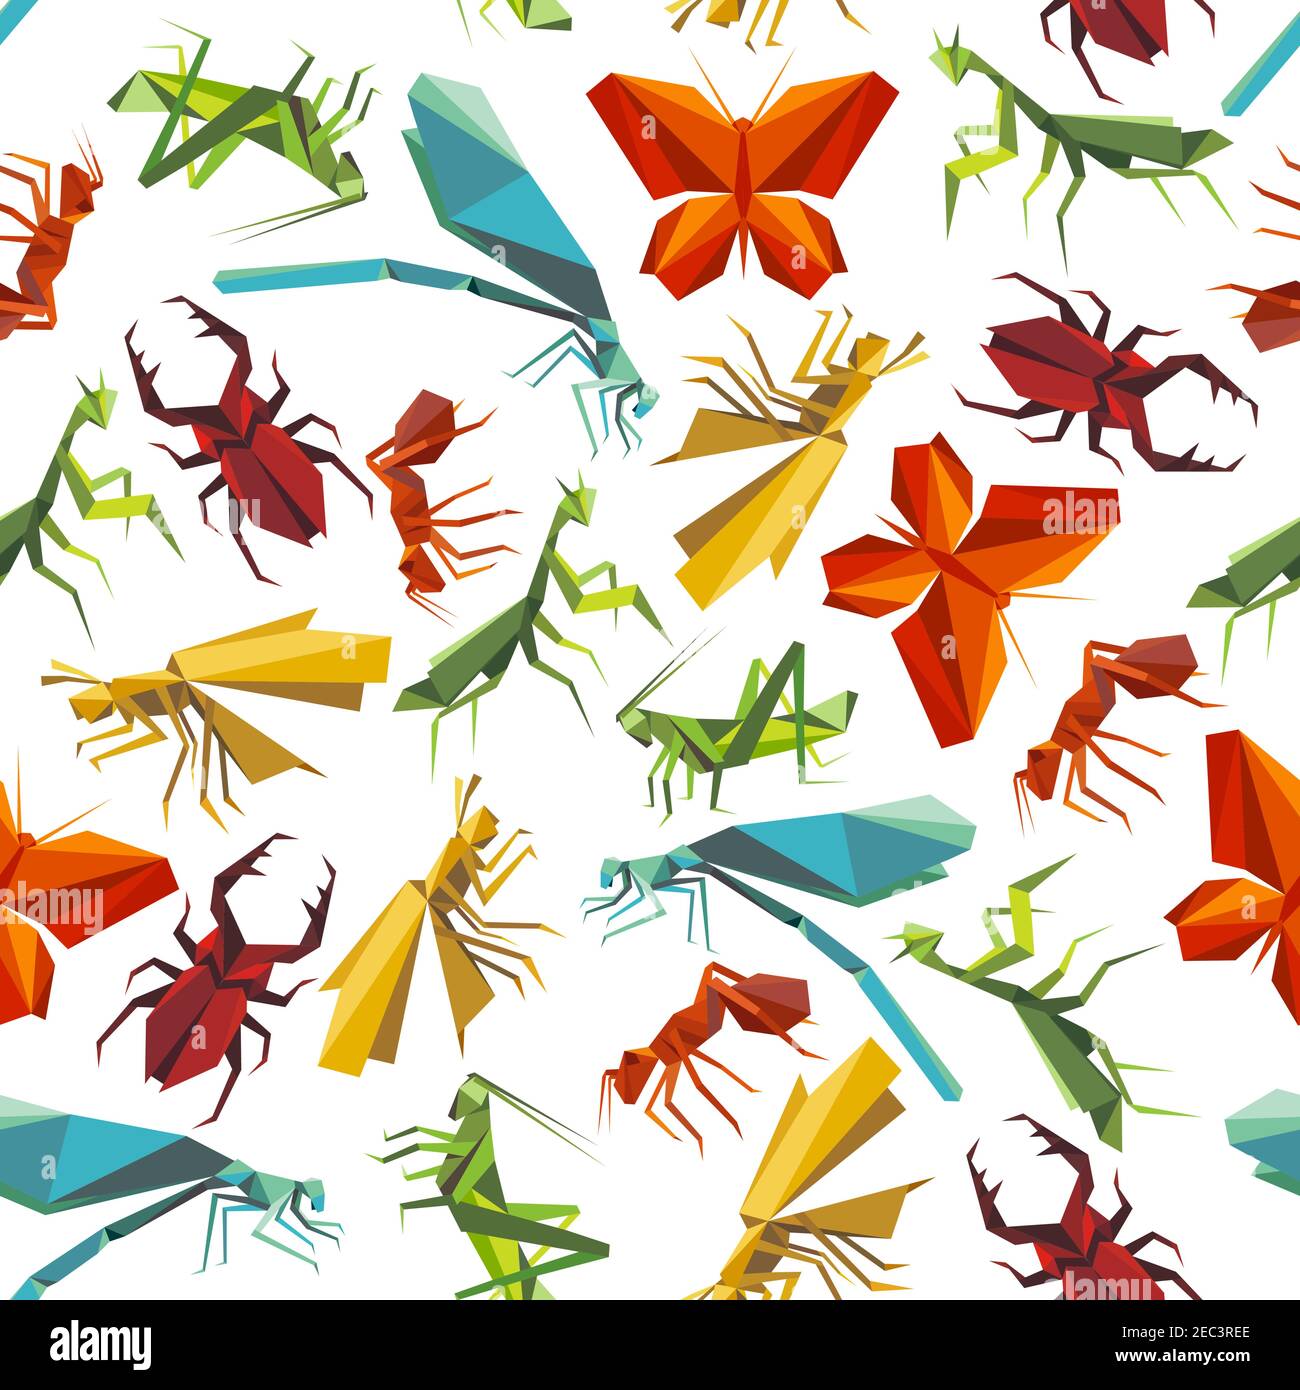 Seamless paper origami insects pattern background for nature theme design with colorful butterflies and ants, dragonflies, beetles and grasshoppers, m Stock Vector